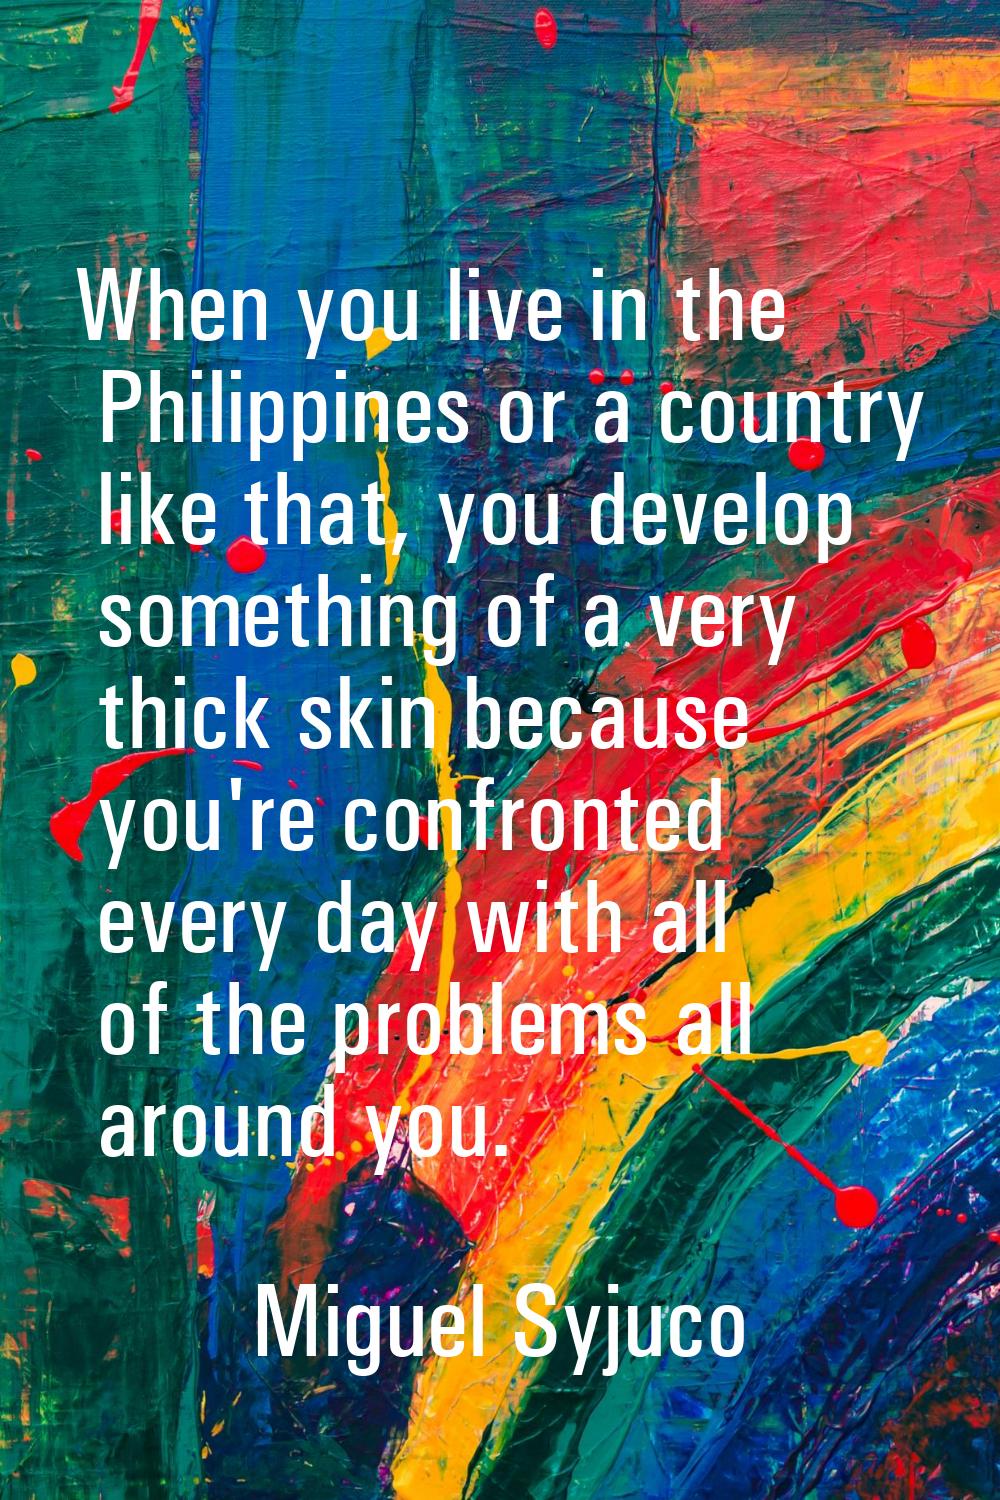 When you live in the Philippines or a country like that, you develop something of a very thick skin